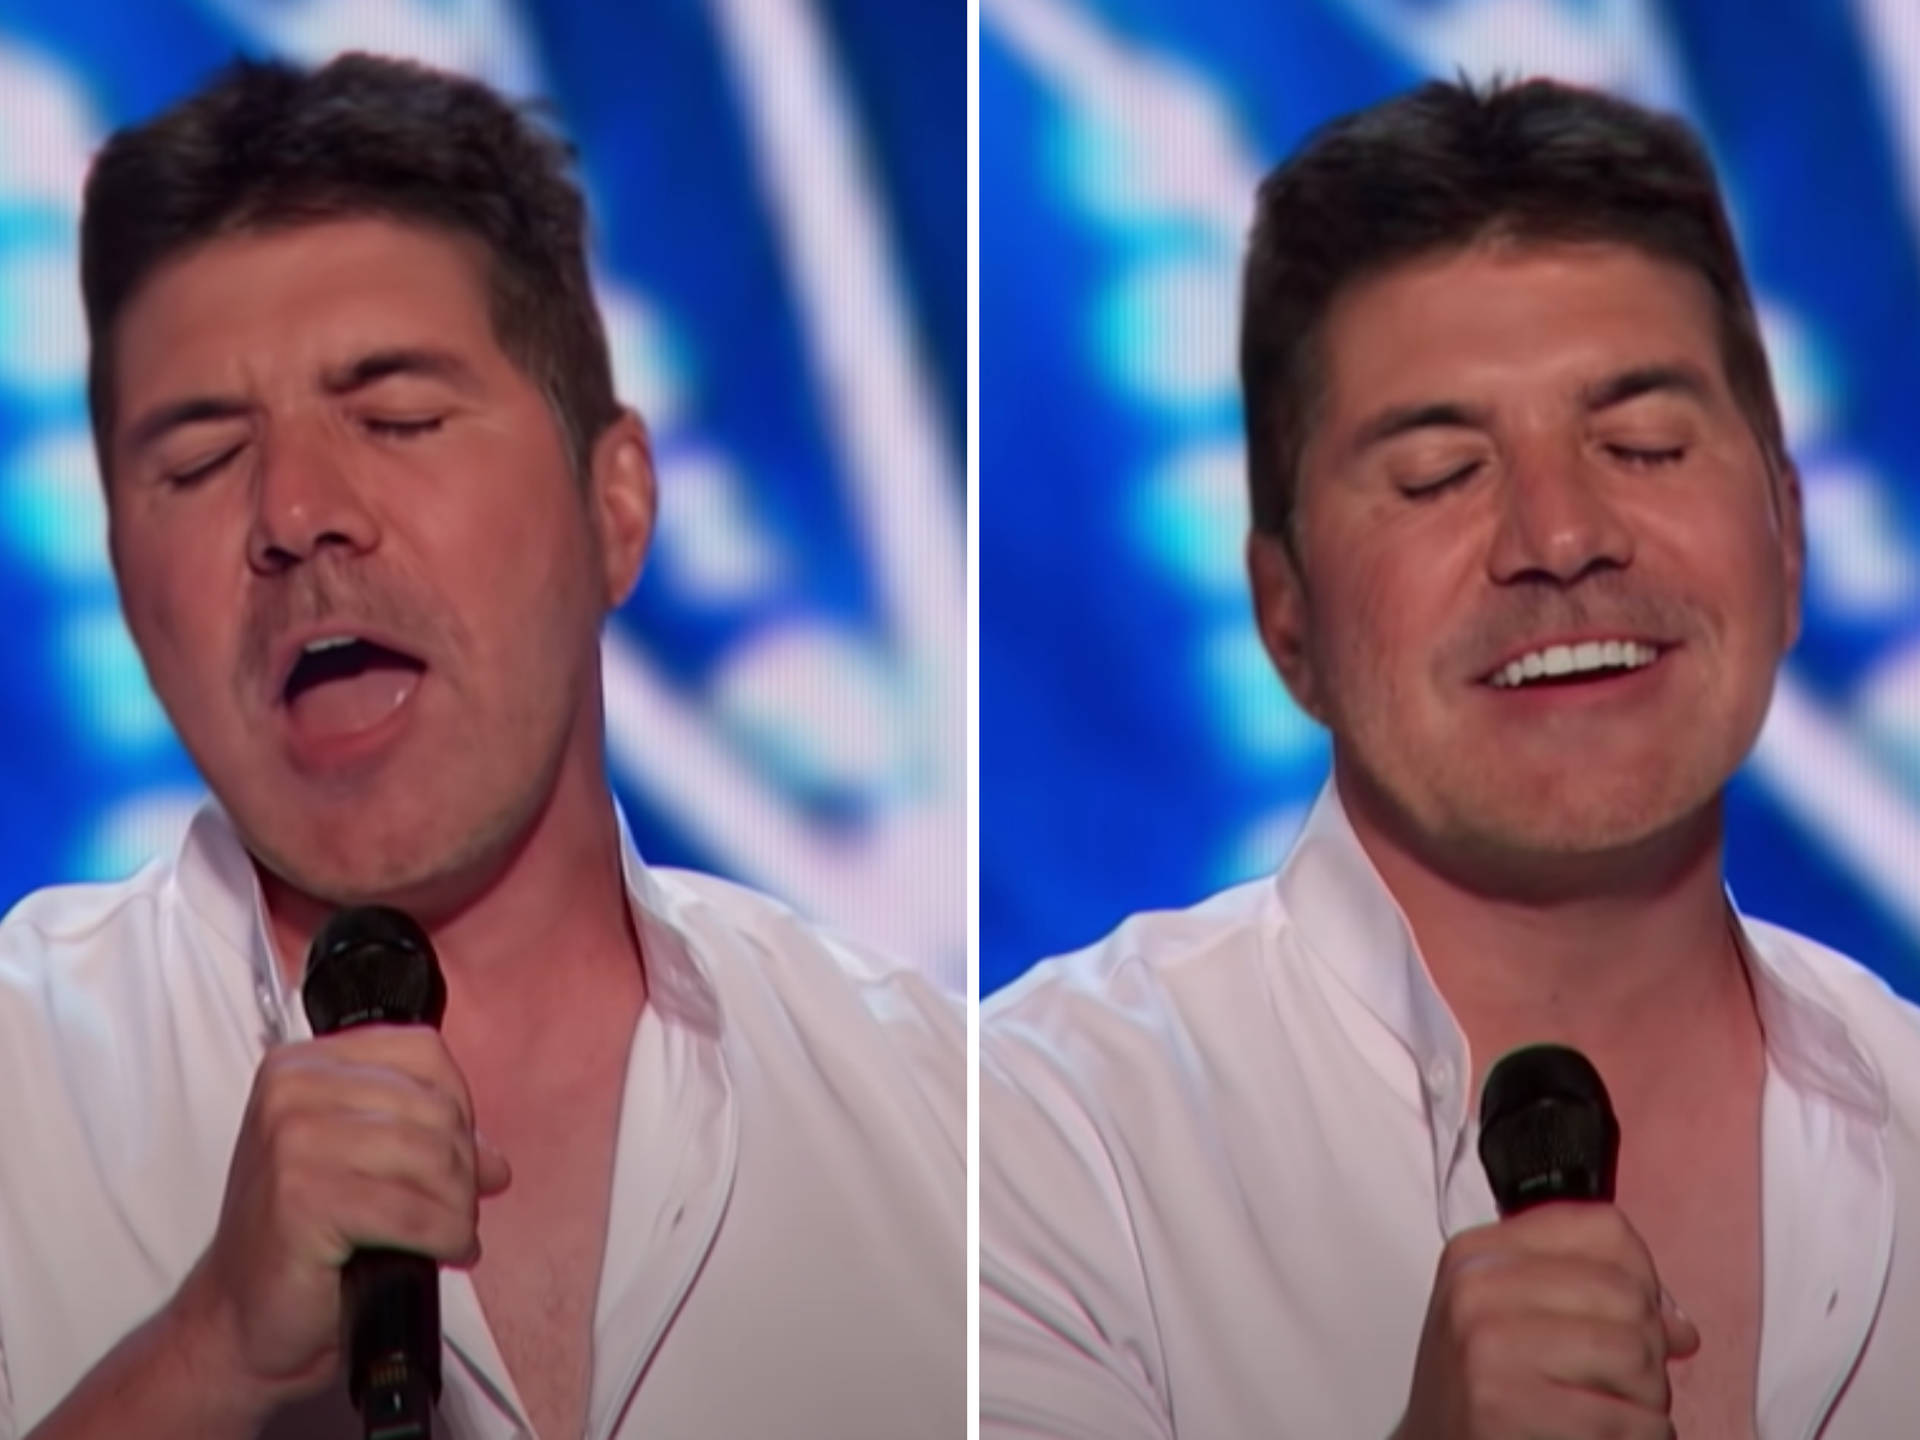 Simon Cowell finally sang on the Got Talent stage and he was incredible - Smooth